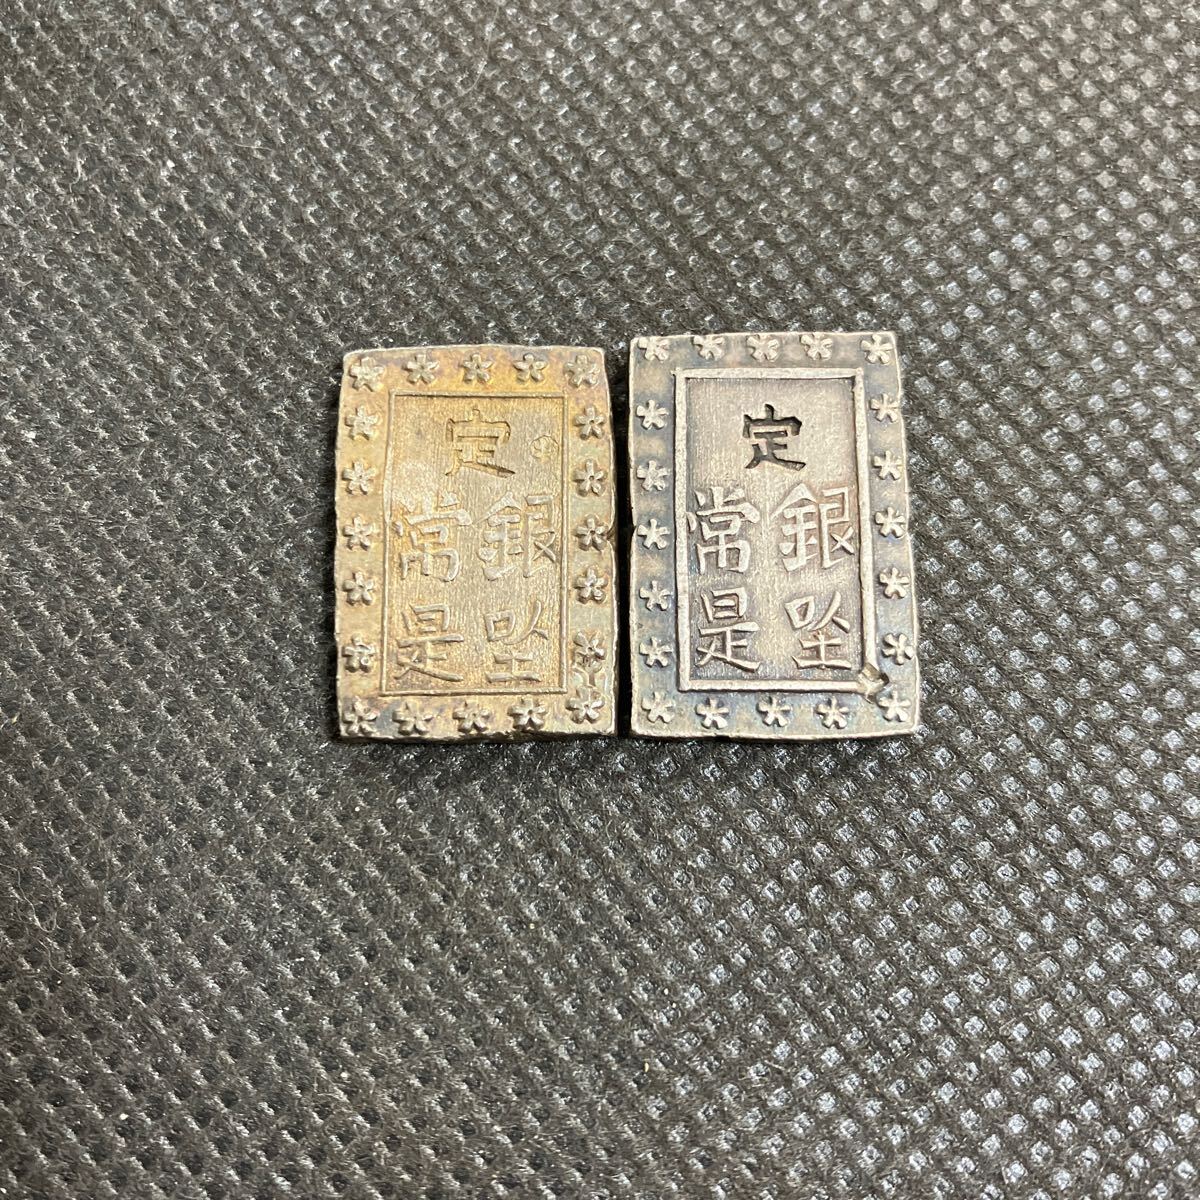 2 sheets set (. inside one minute silver ) heaven guarantee one minute silver stamp seat seal collection . inside Tsuruoka cheap .